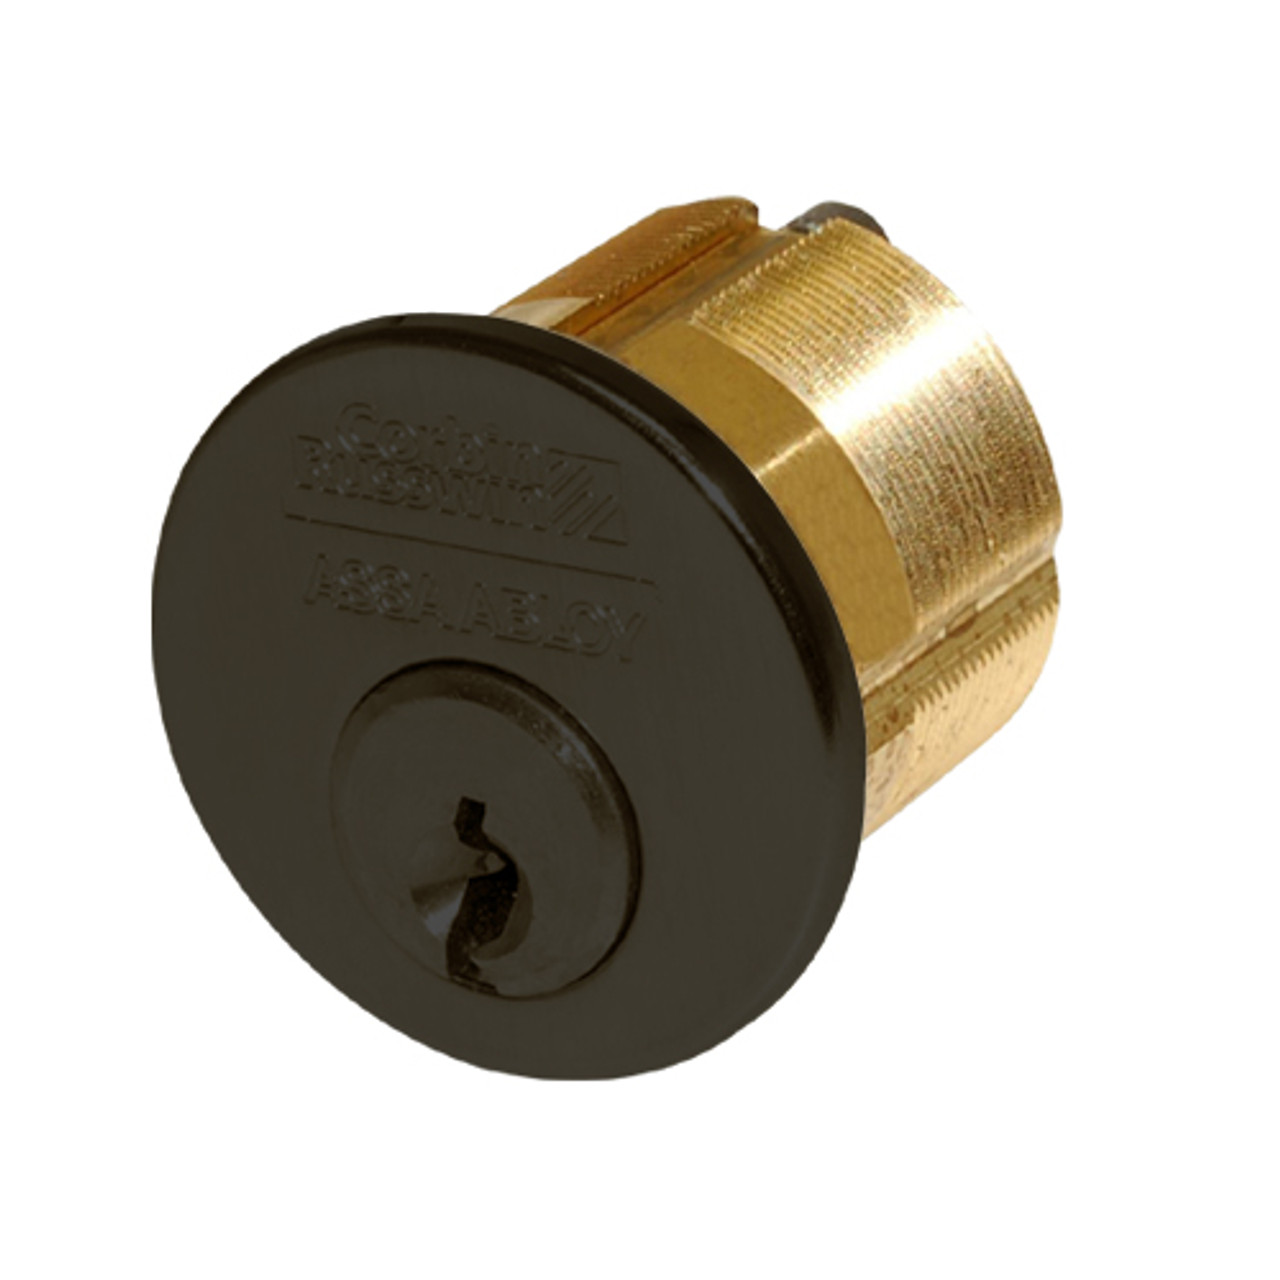 CR1000-138-A06-6-H1-613 Corbin Conventional Mortise Cylinder for Mortise Lock and DL3000 Deadlocks with Schlage L9000 Cam in Oil Rubbed Bronze Finish